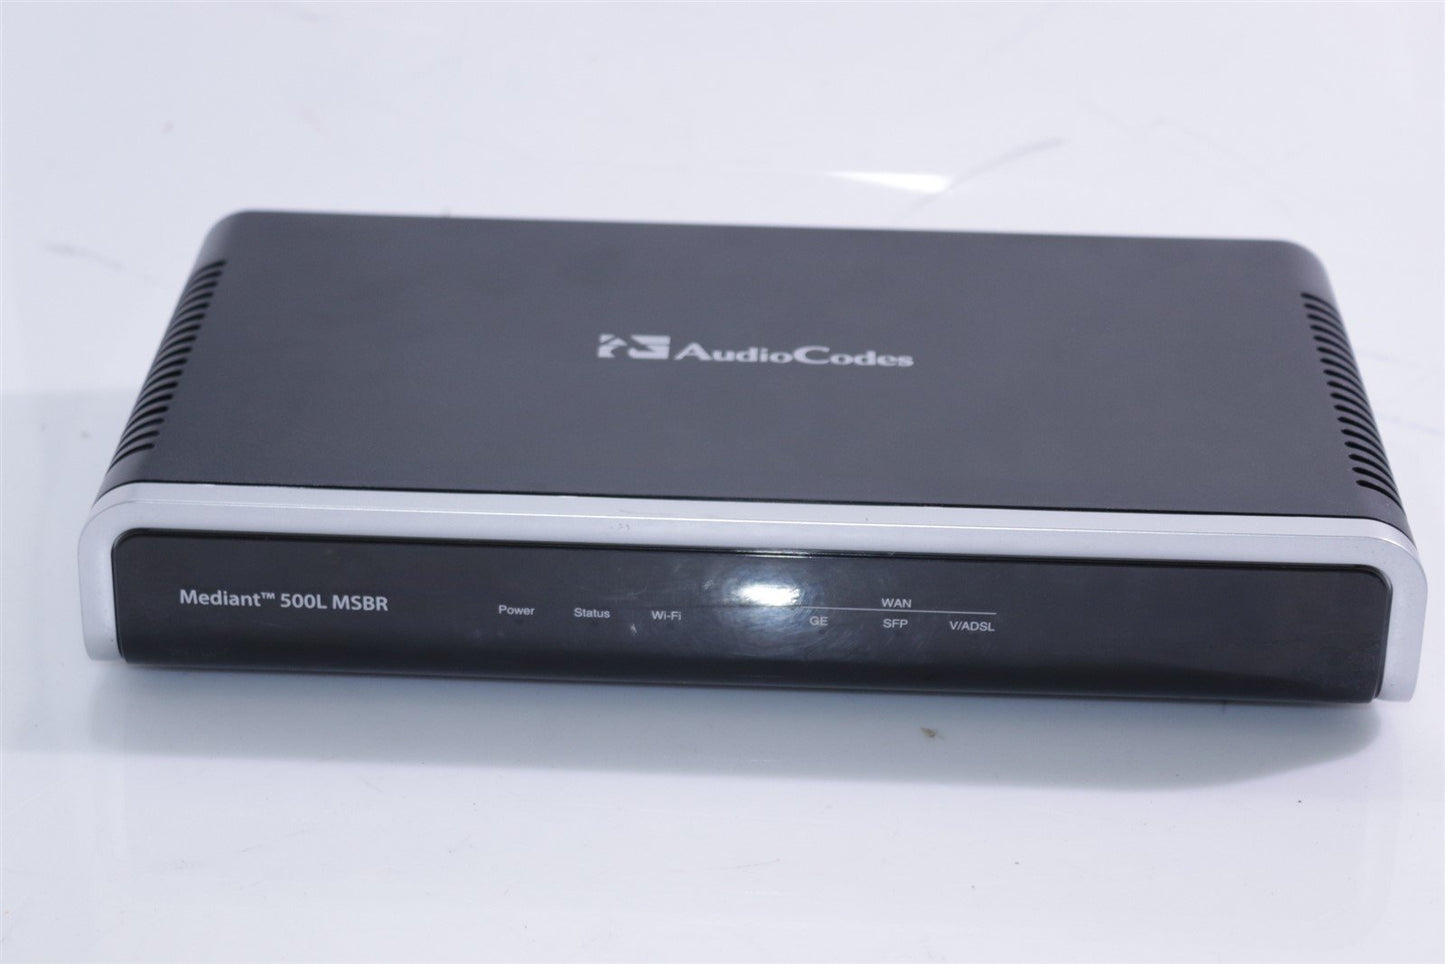 AudioCodes Mediant 500L MSBR M500L-4S4OW-A1GECS-T All-in-one Router GGWL00008